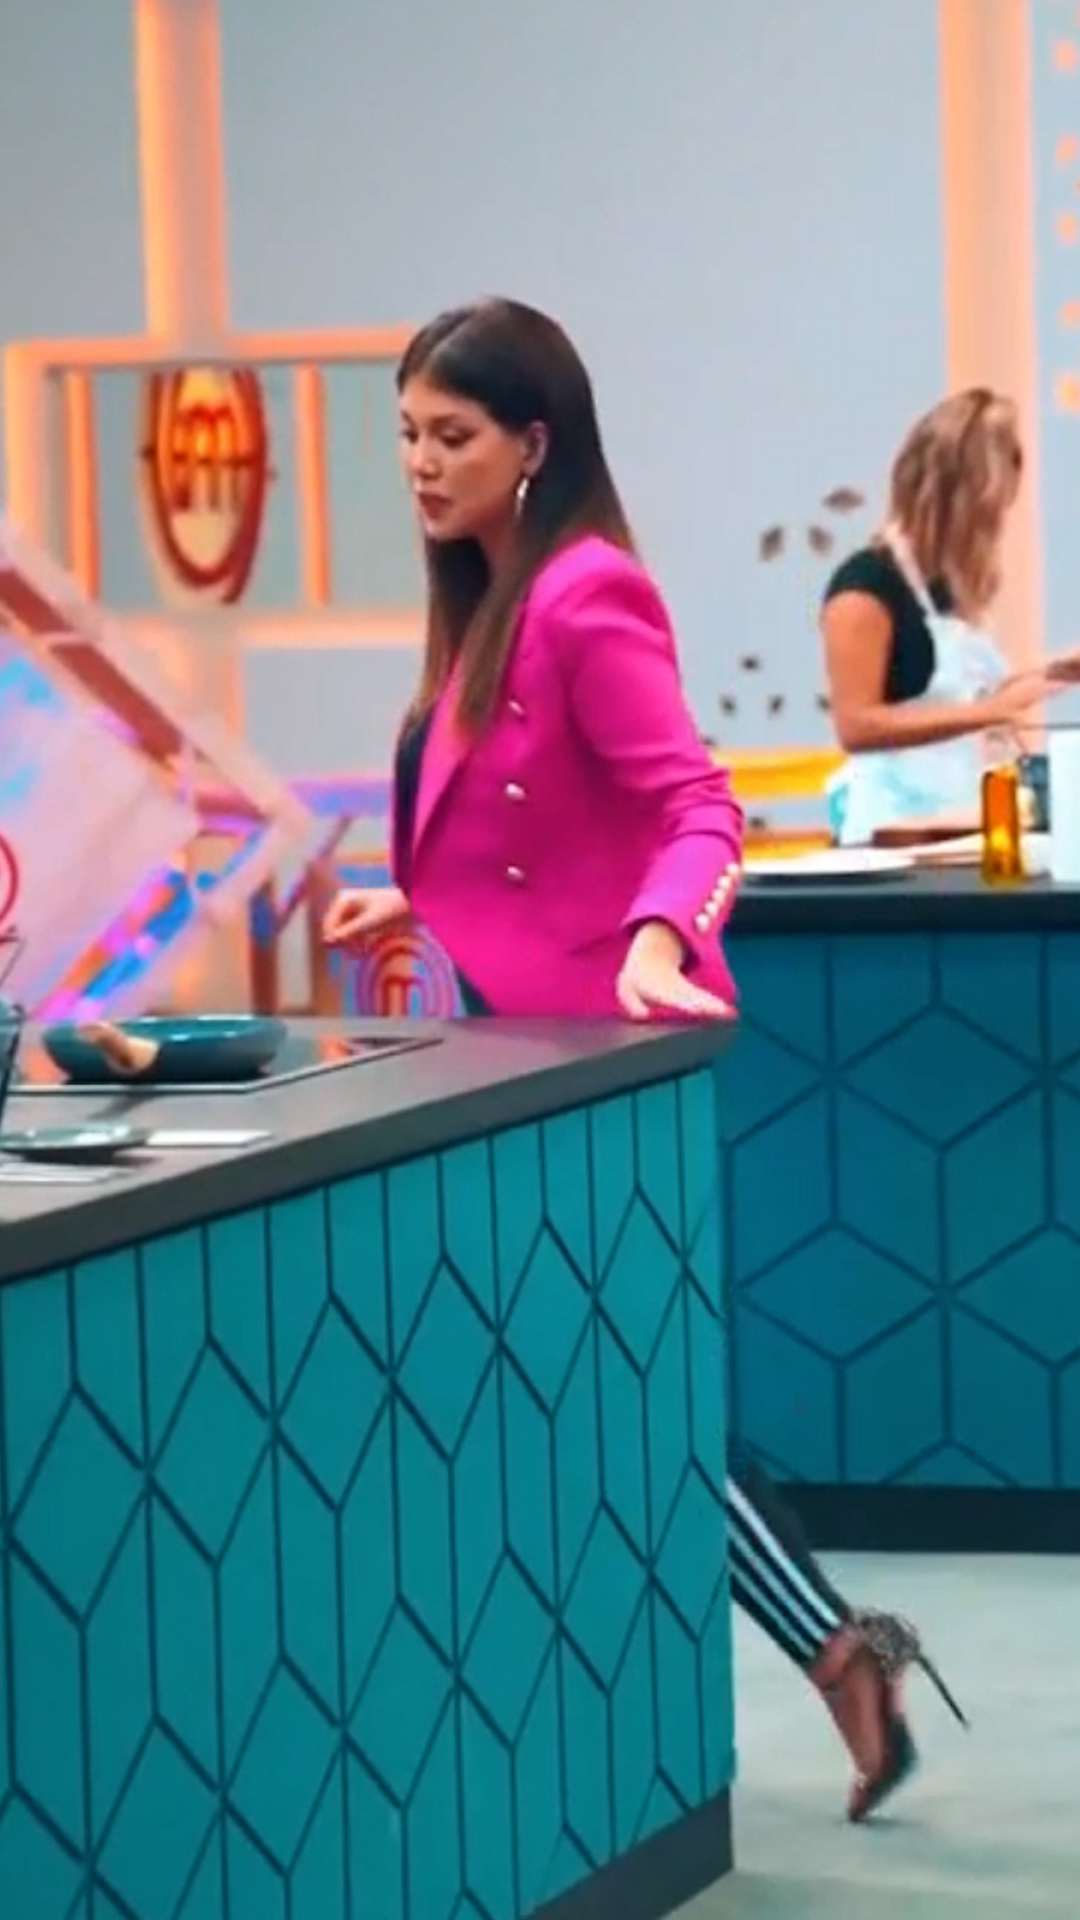 Big Brother: an unpublished video showed who turned off everything when the Masterchef juries entered and the kitchens did not work (Photo: Capture Big Brother, Telefe)